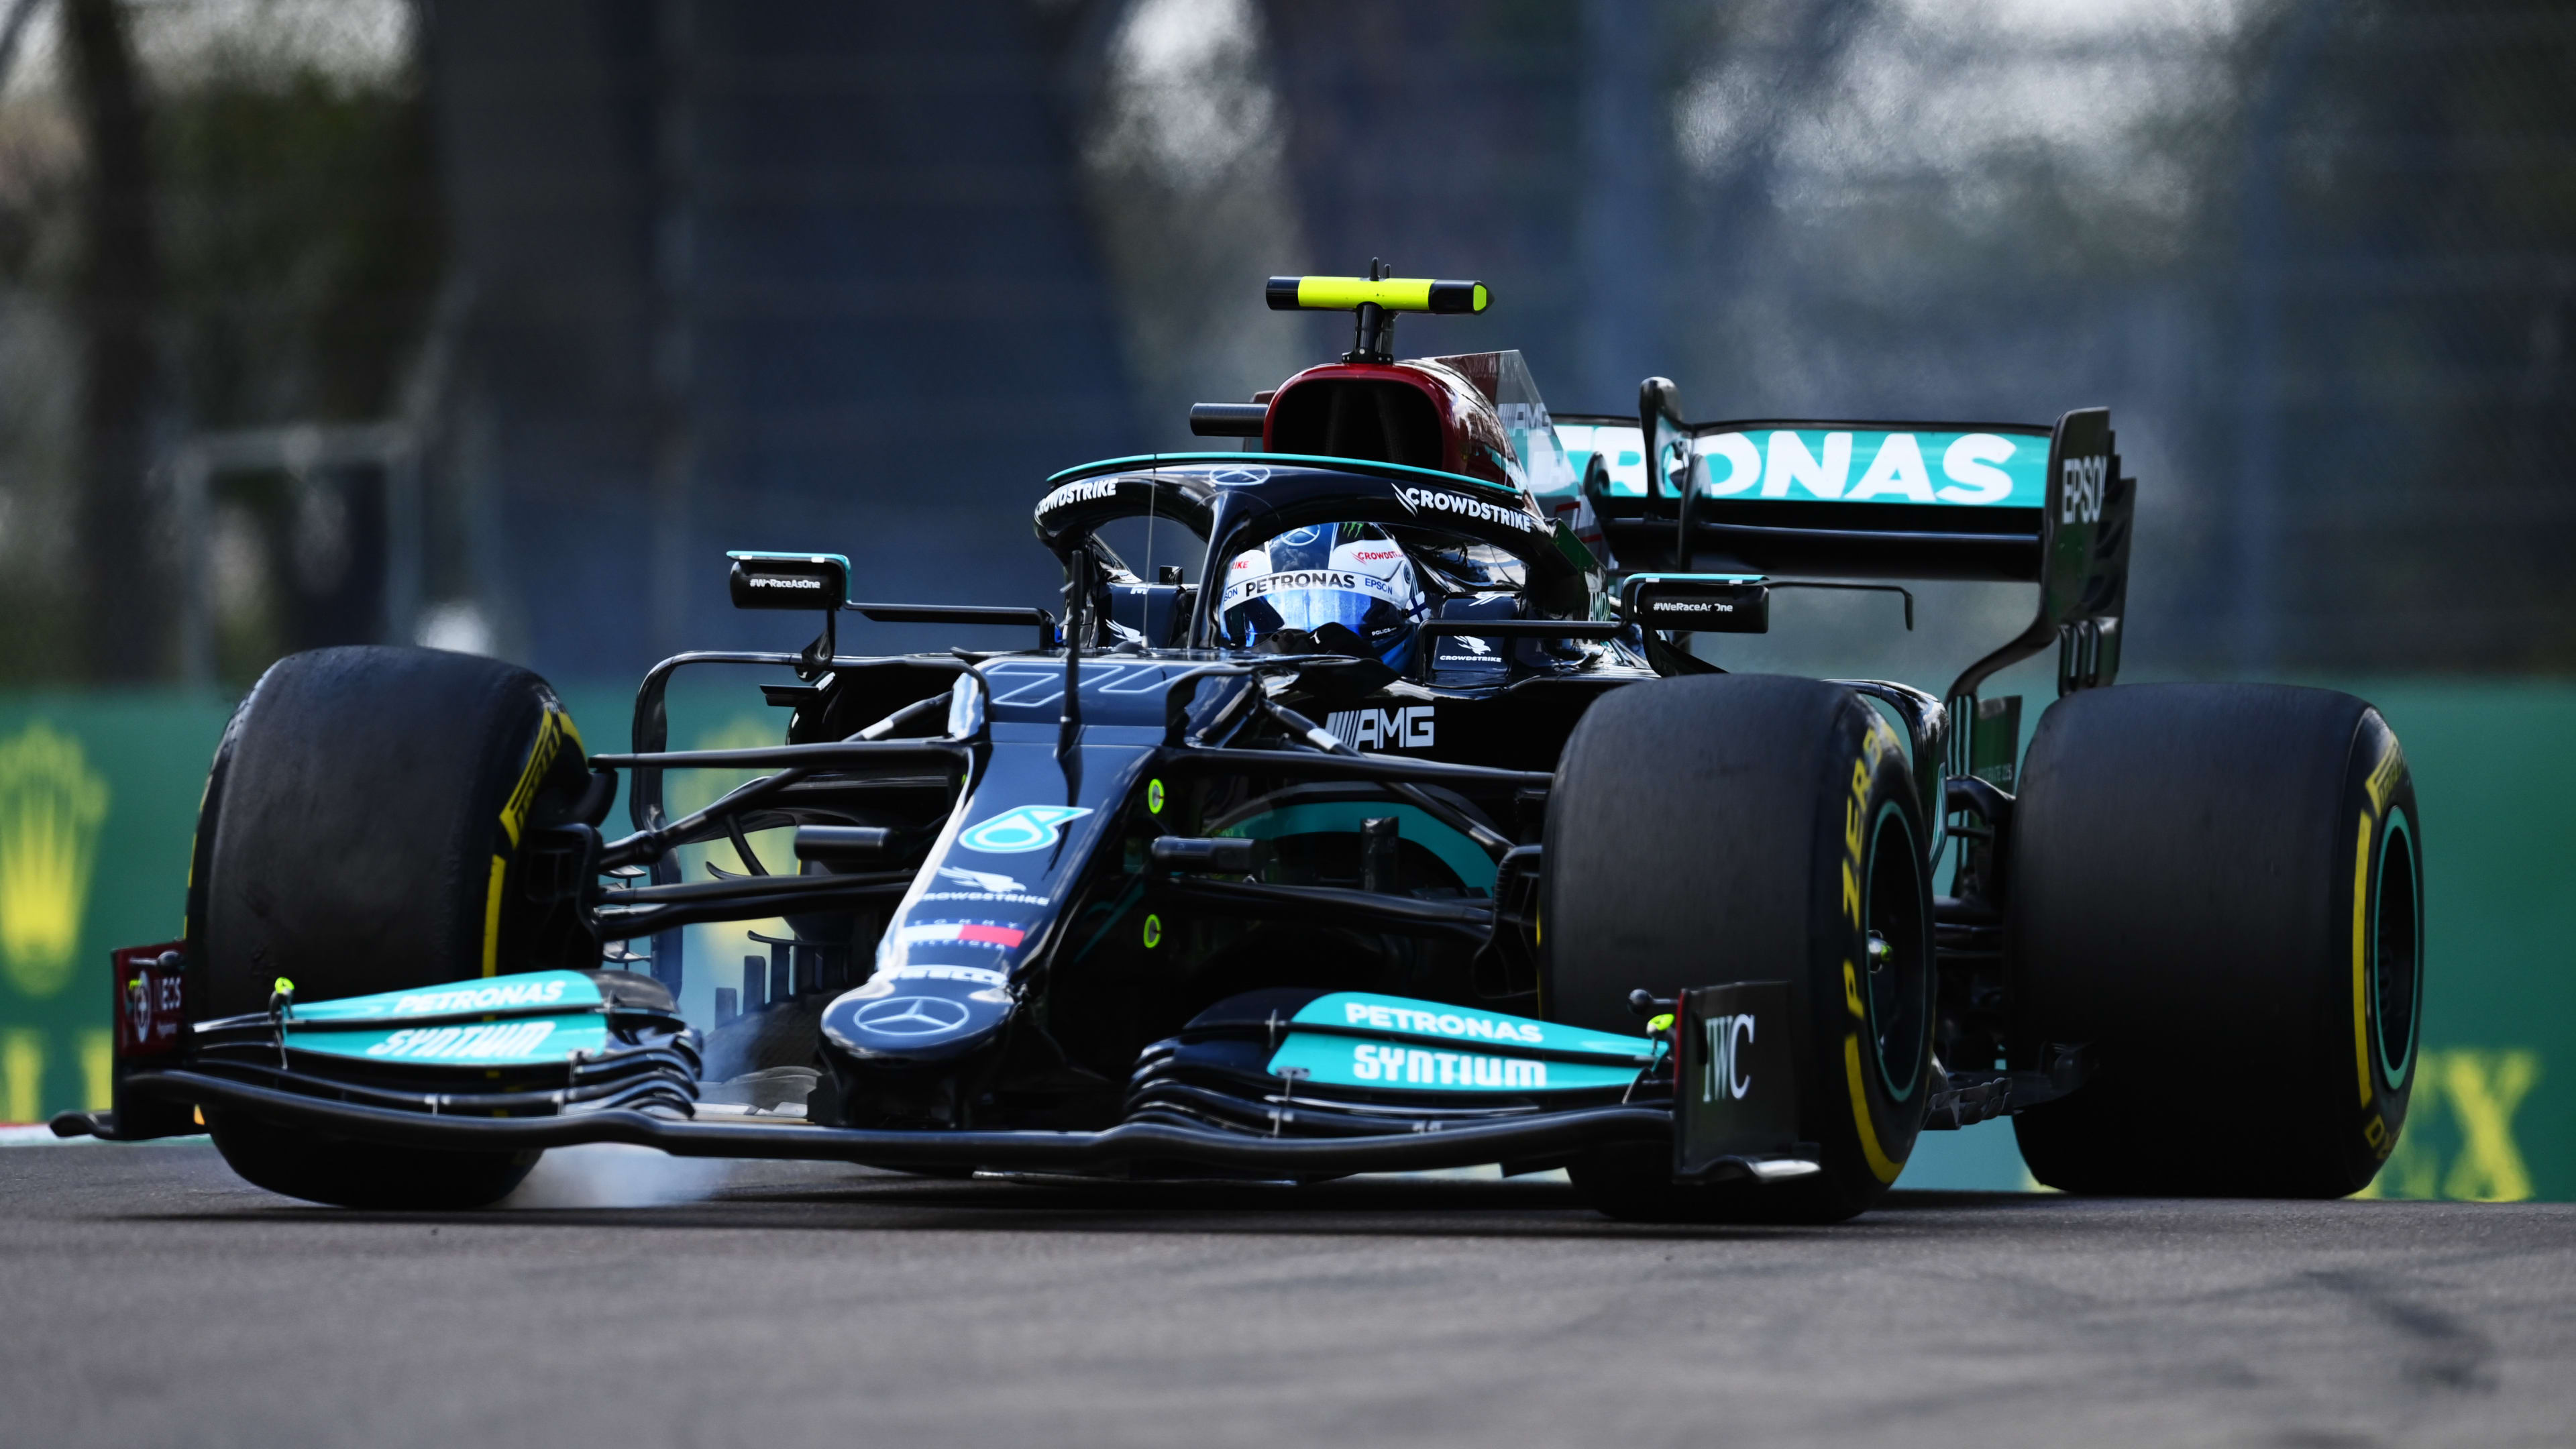 2021 Emilia Romagna Grand Prix FP2 report and highlights: Bottas fastest as Verstappen stops on track and lets Leclerc shunt stop second practice early